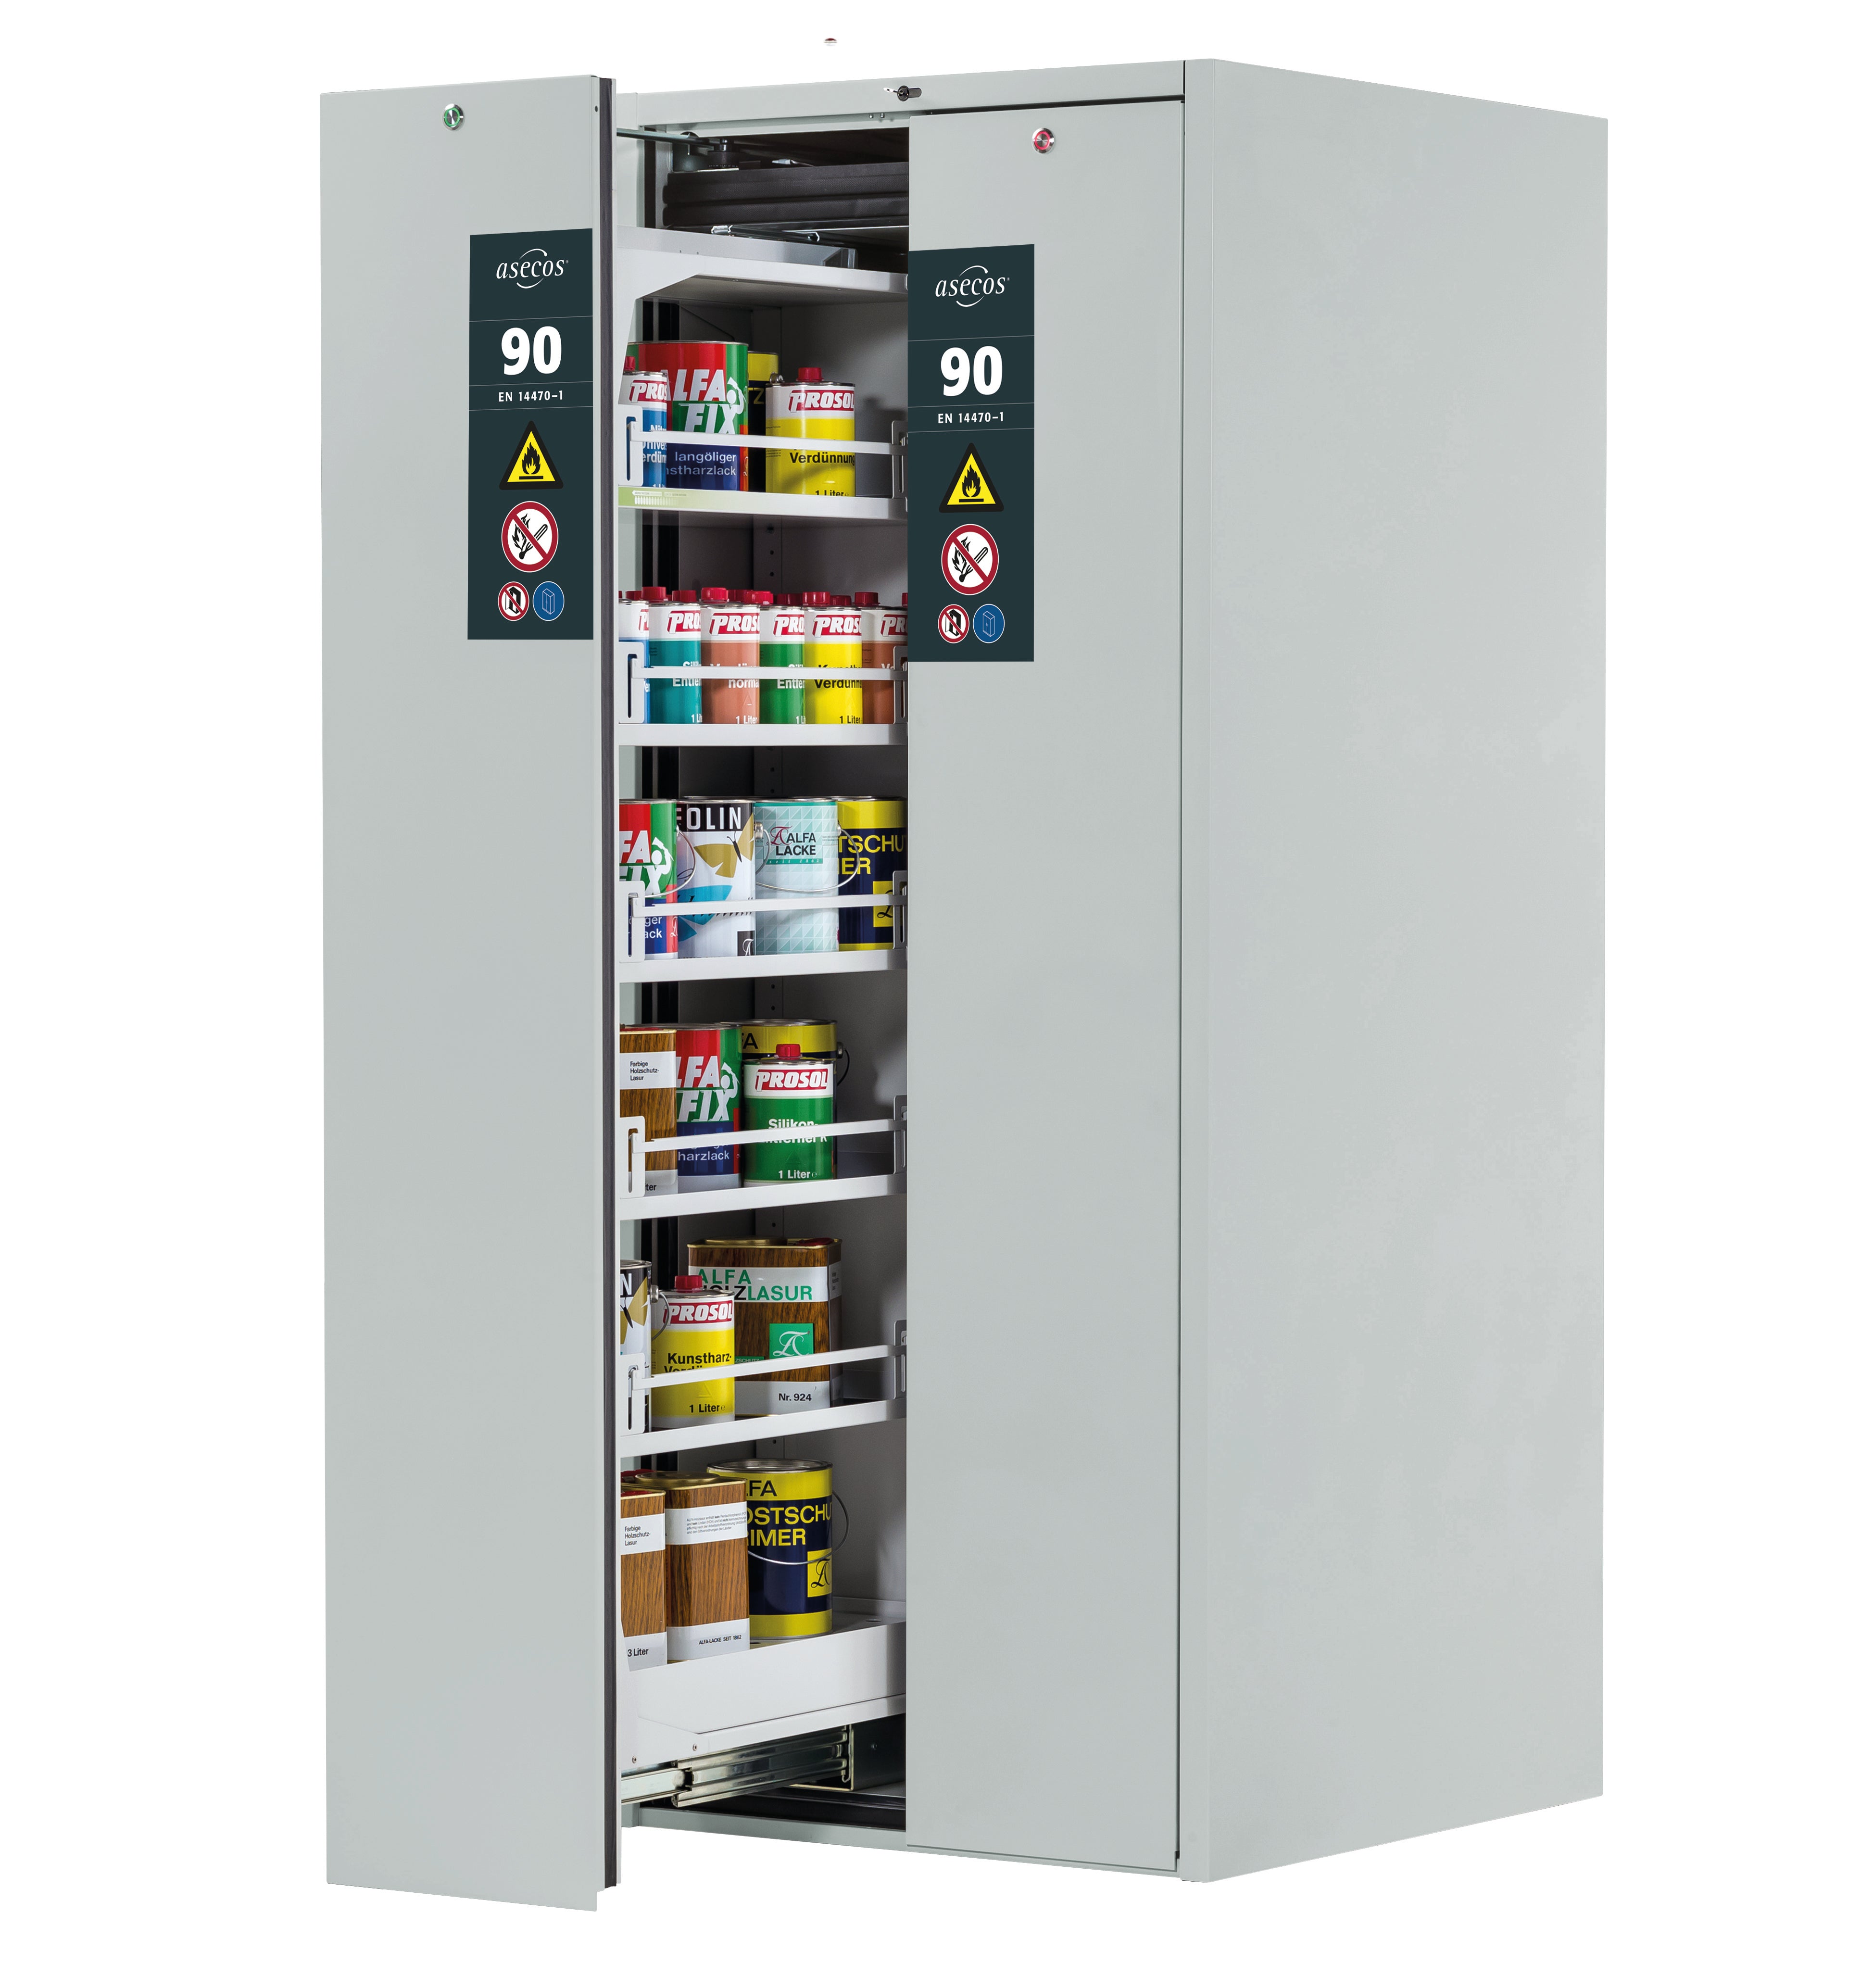 Type 90 safety cabinet V-MOVE-90 model V90.196.081.VDAC:0012 in light gray RAL 7035 with 5x standard shelves (sheet steel)